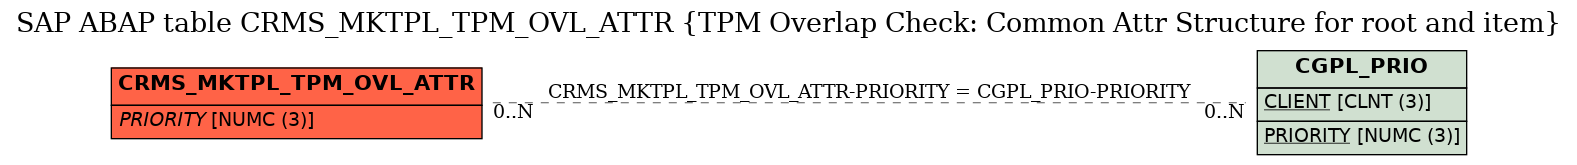 E-R Diagram for table CRMS_MKTPL_TPM_OVL_ATTR (TPM Overlap Check: Common Attr Structure for root and item)